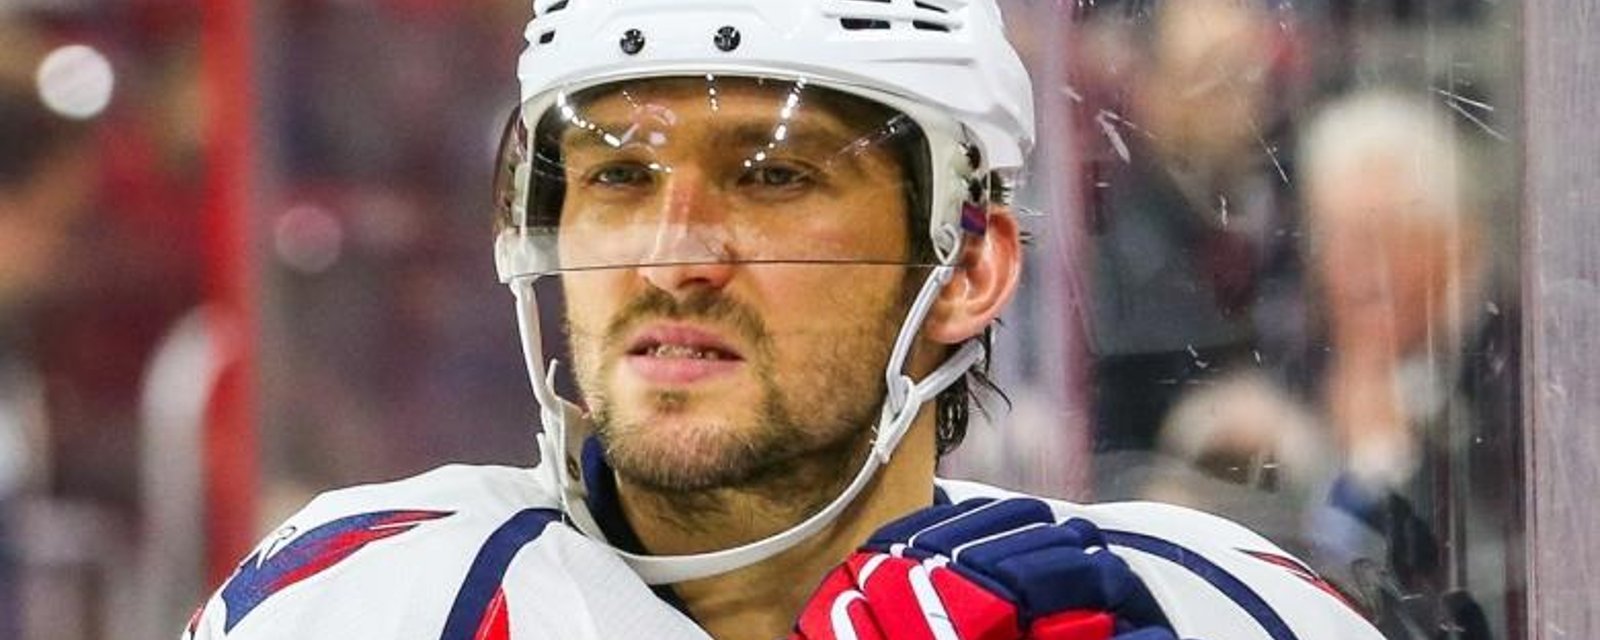 The NHL has suspended Capitals captain Alexander Ovechkin.